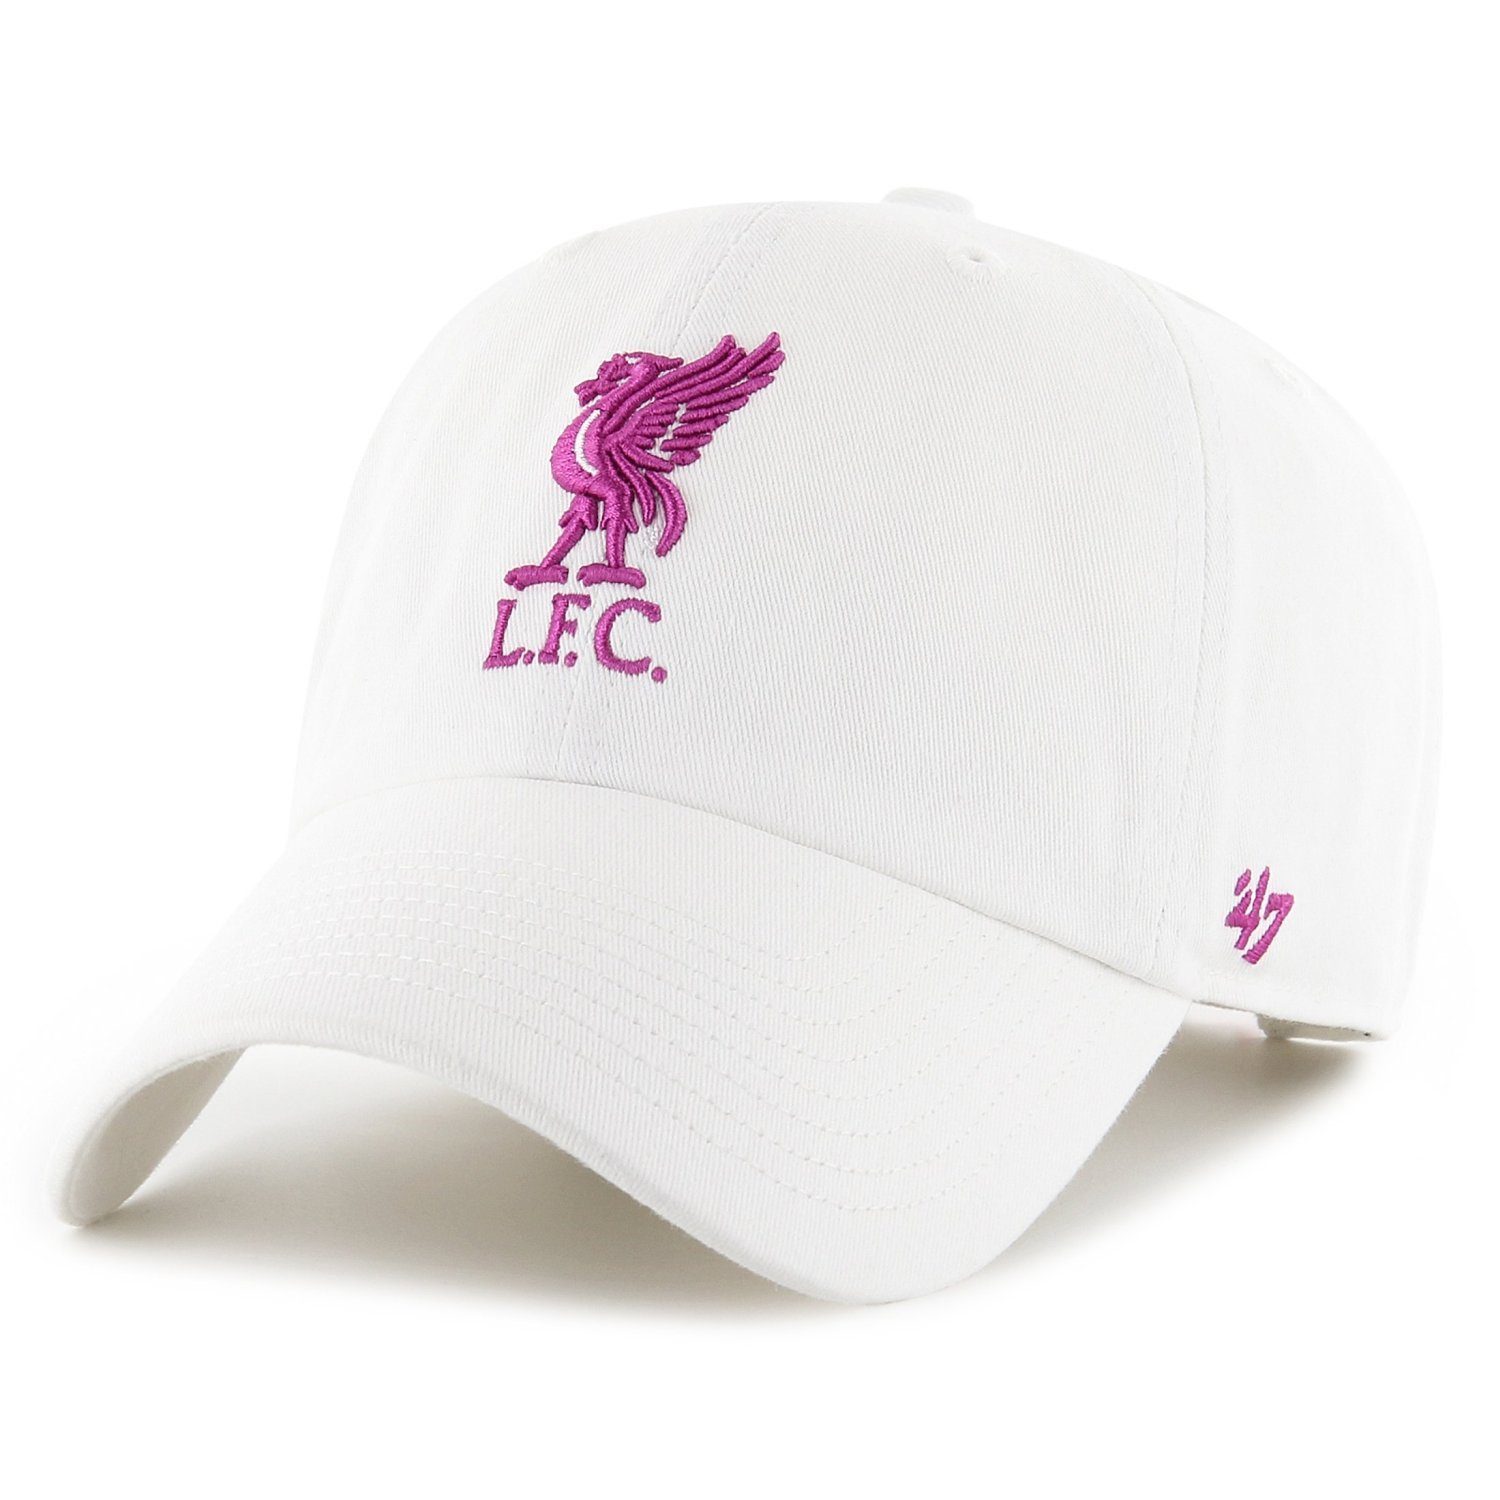 '47 Brand Trucker Cap RelaxedFit CLEAN UP FC Liverpool